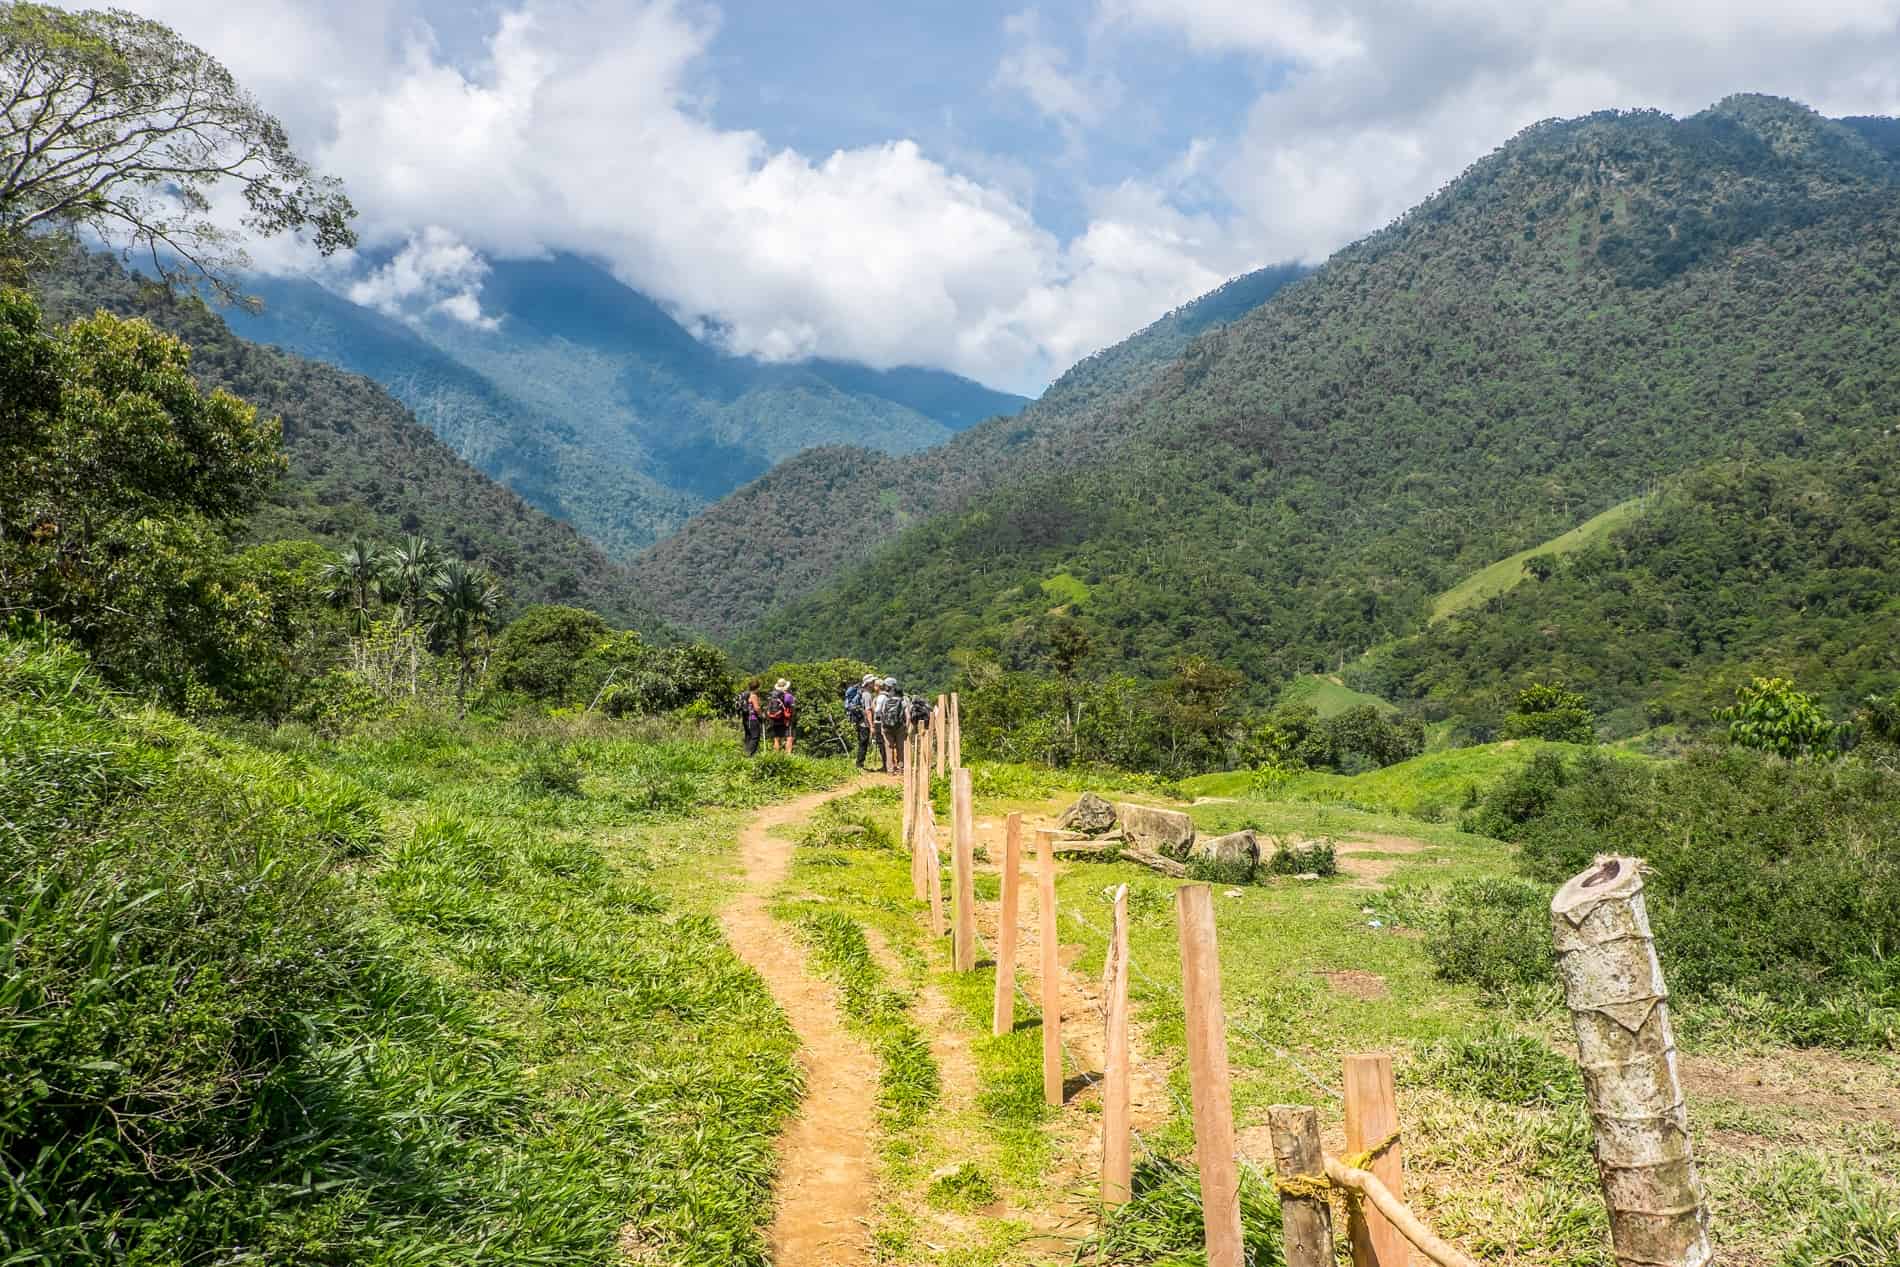 A small group trekking through hills and farmland on the Lost City trek in Colombia